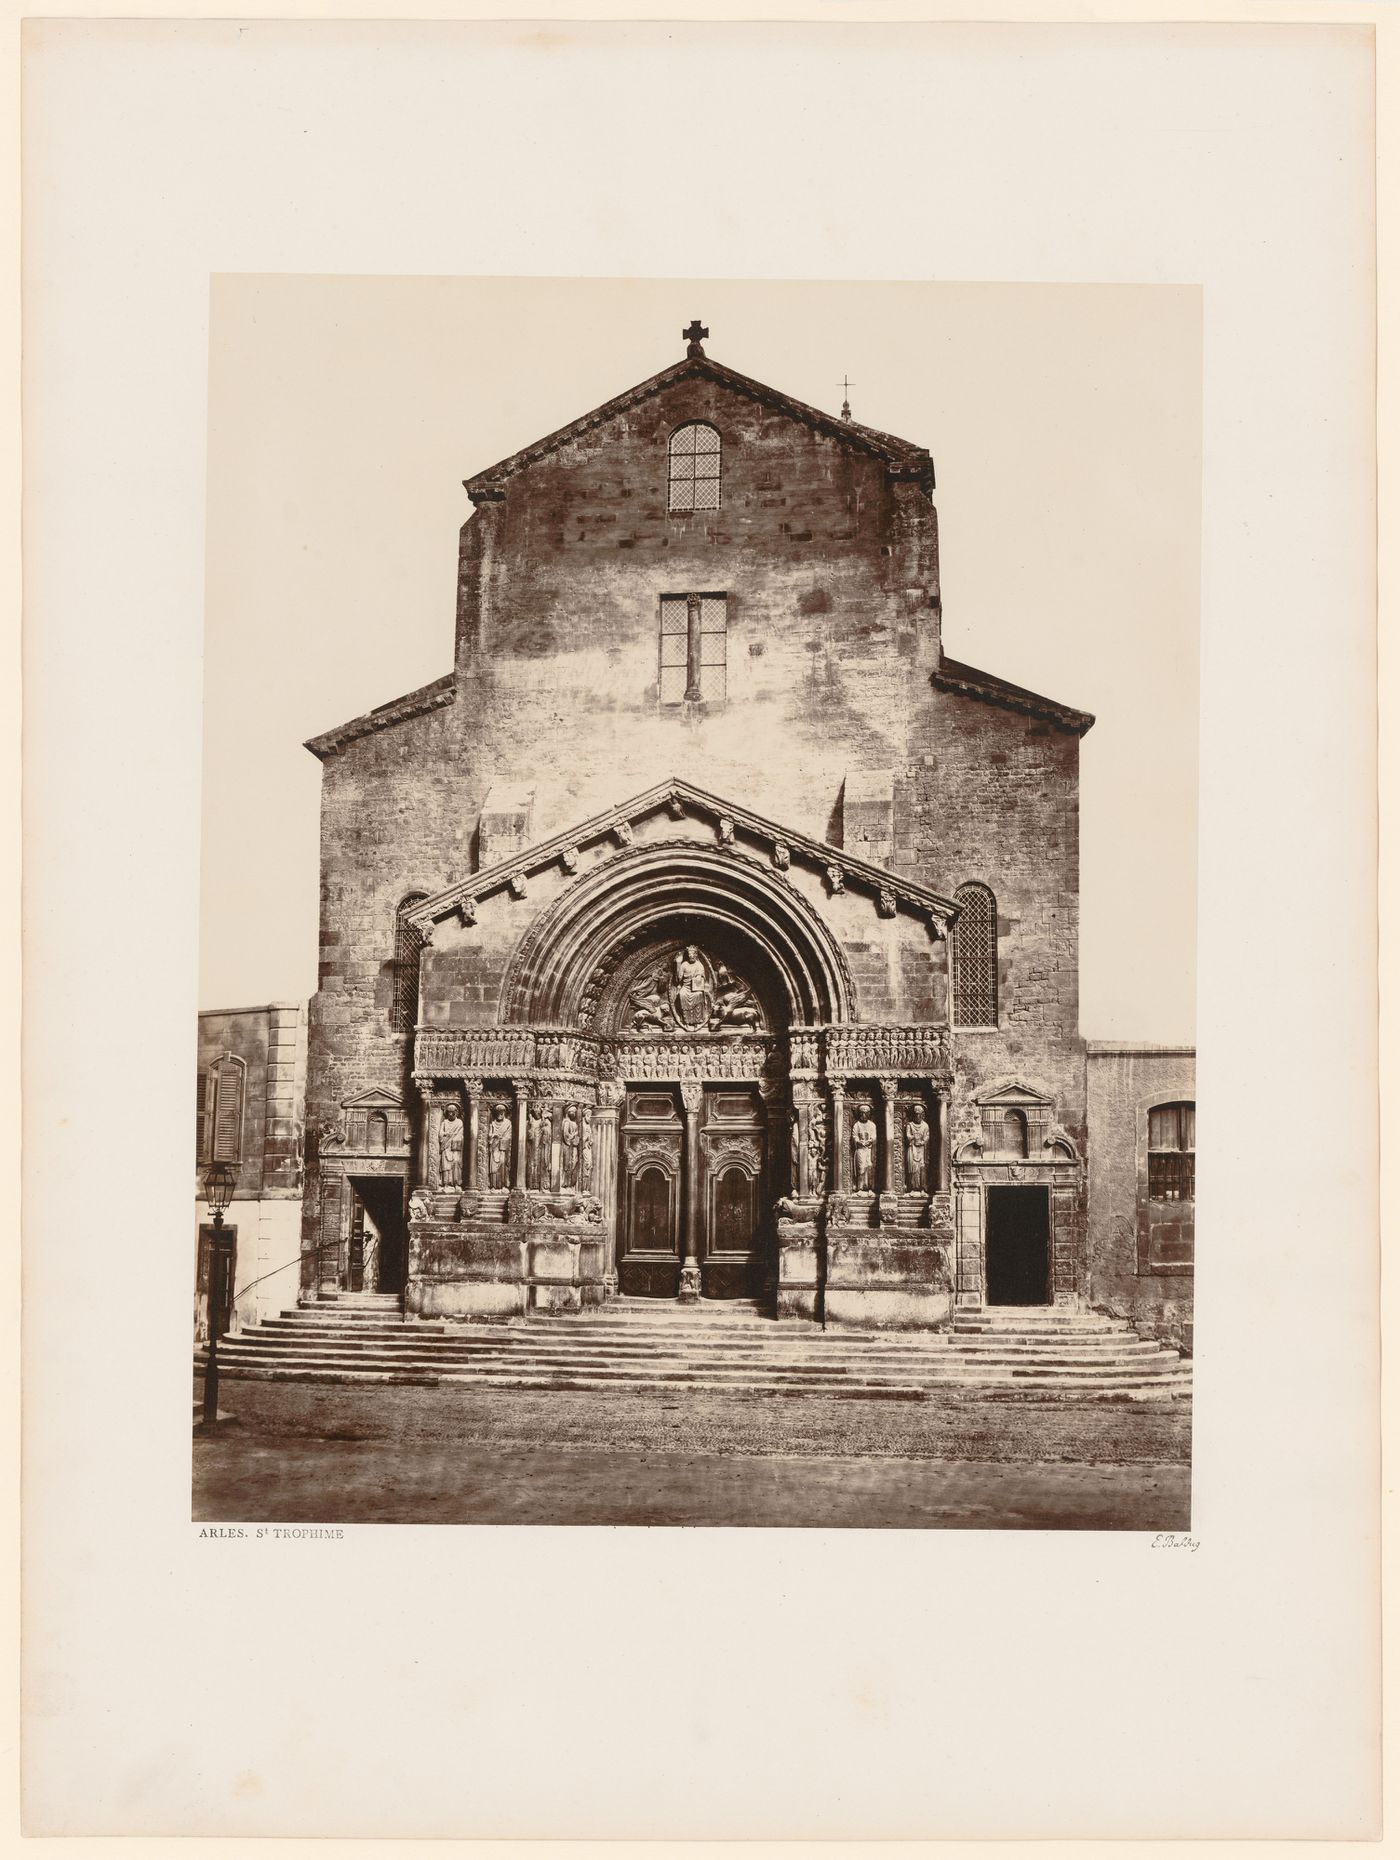 Exterior view west façade of St. Trophime, Arles, France